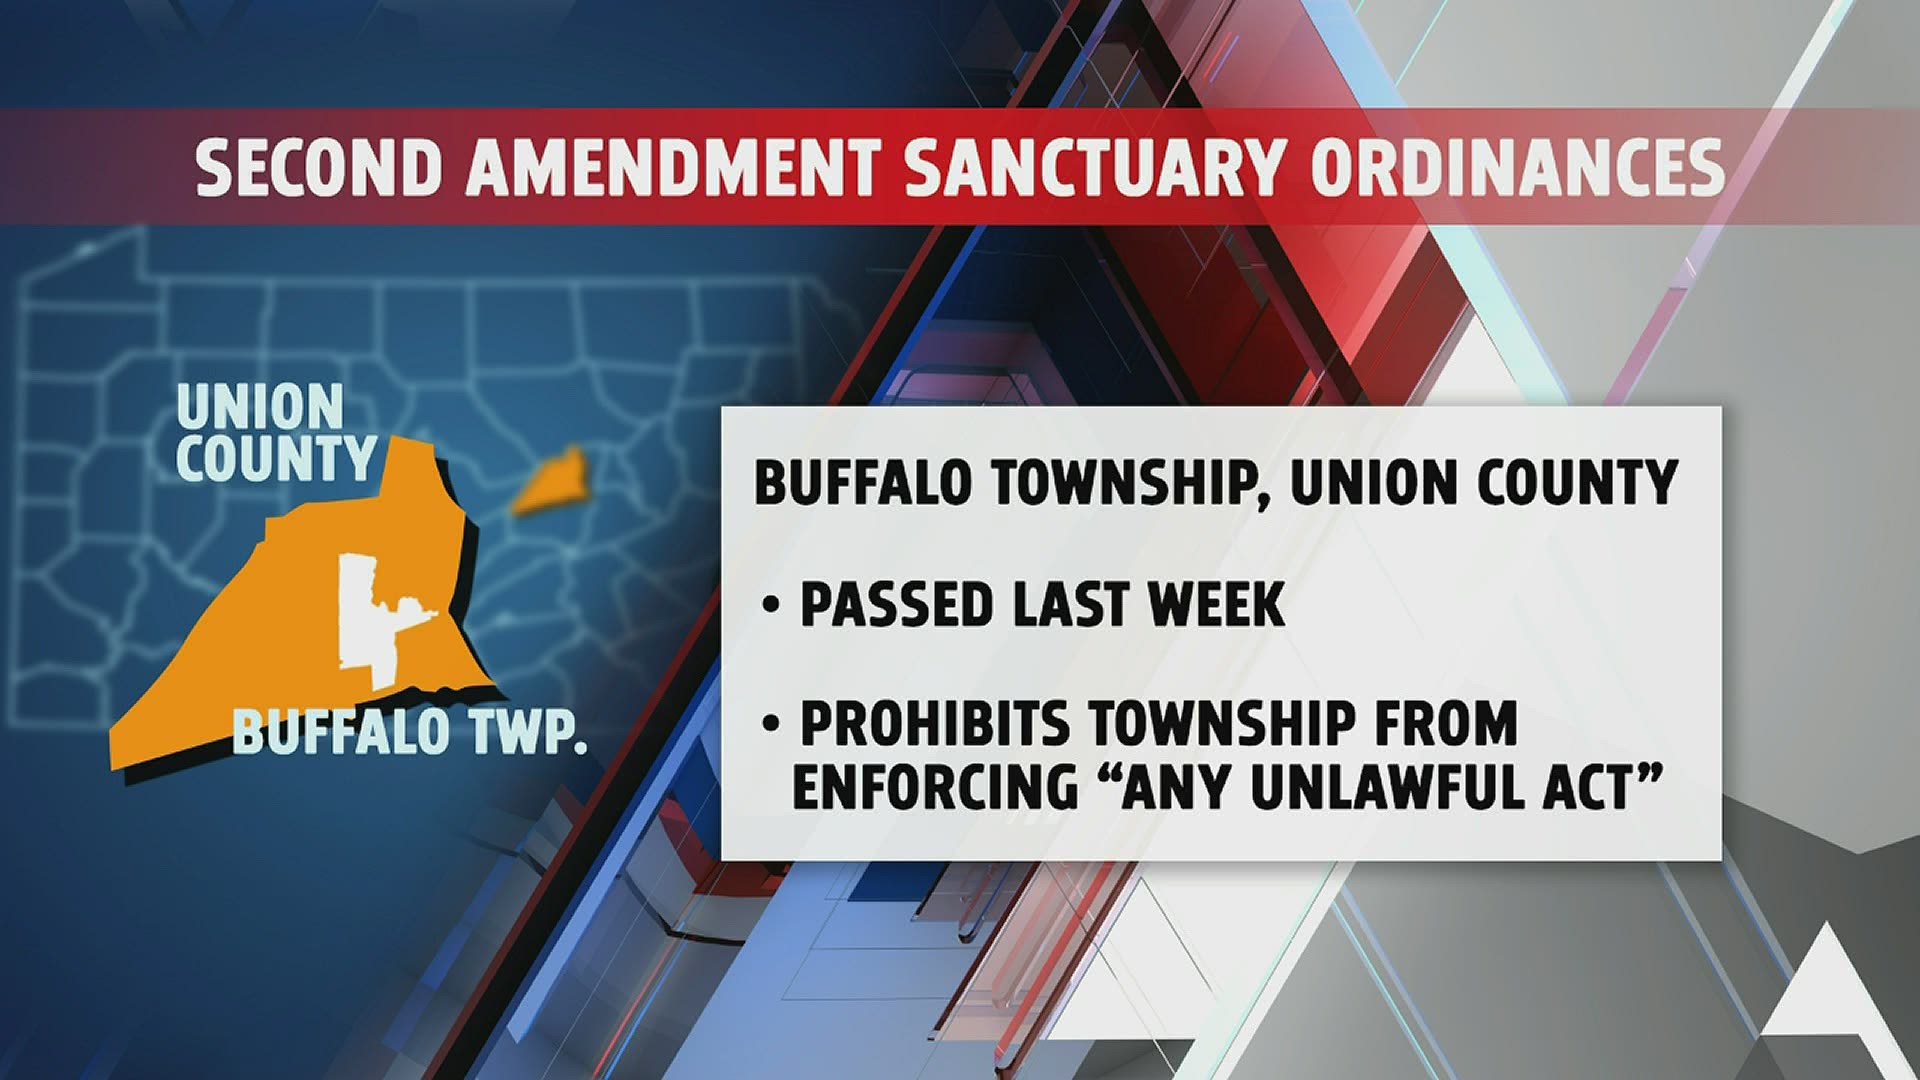 There's an ordinance pending in a local municipality that would make it a "Second Amendment Sanctuary", and it wouldn't be the first in the state or country to do so